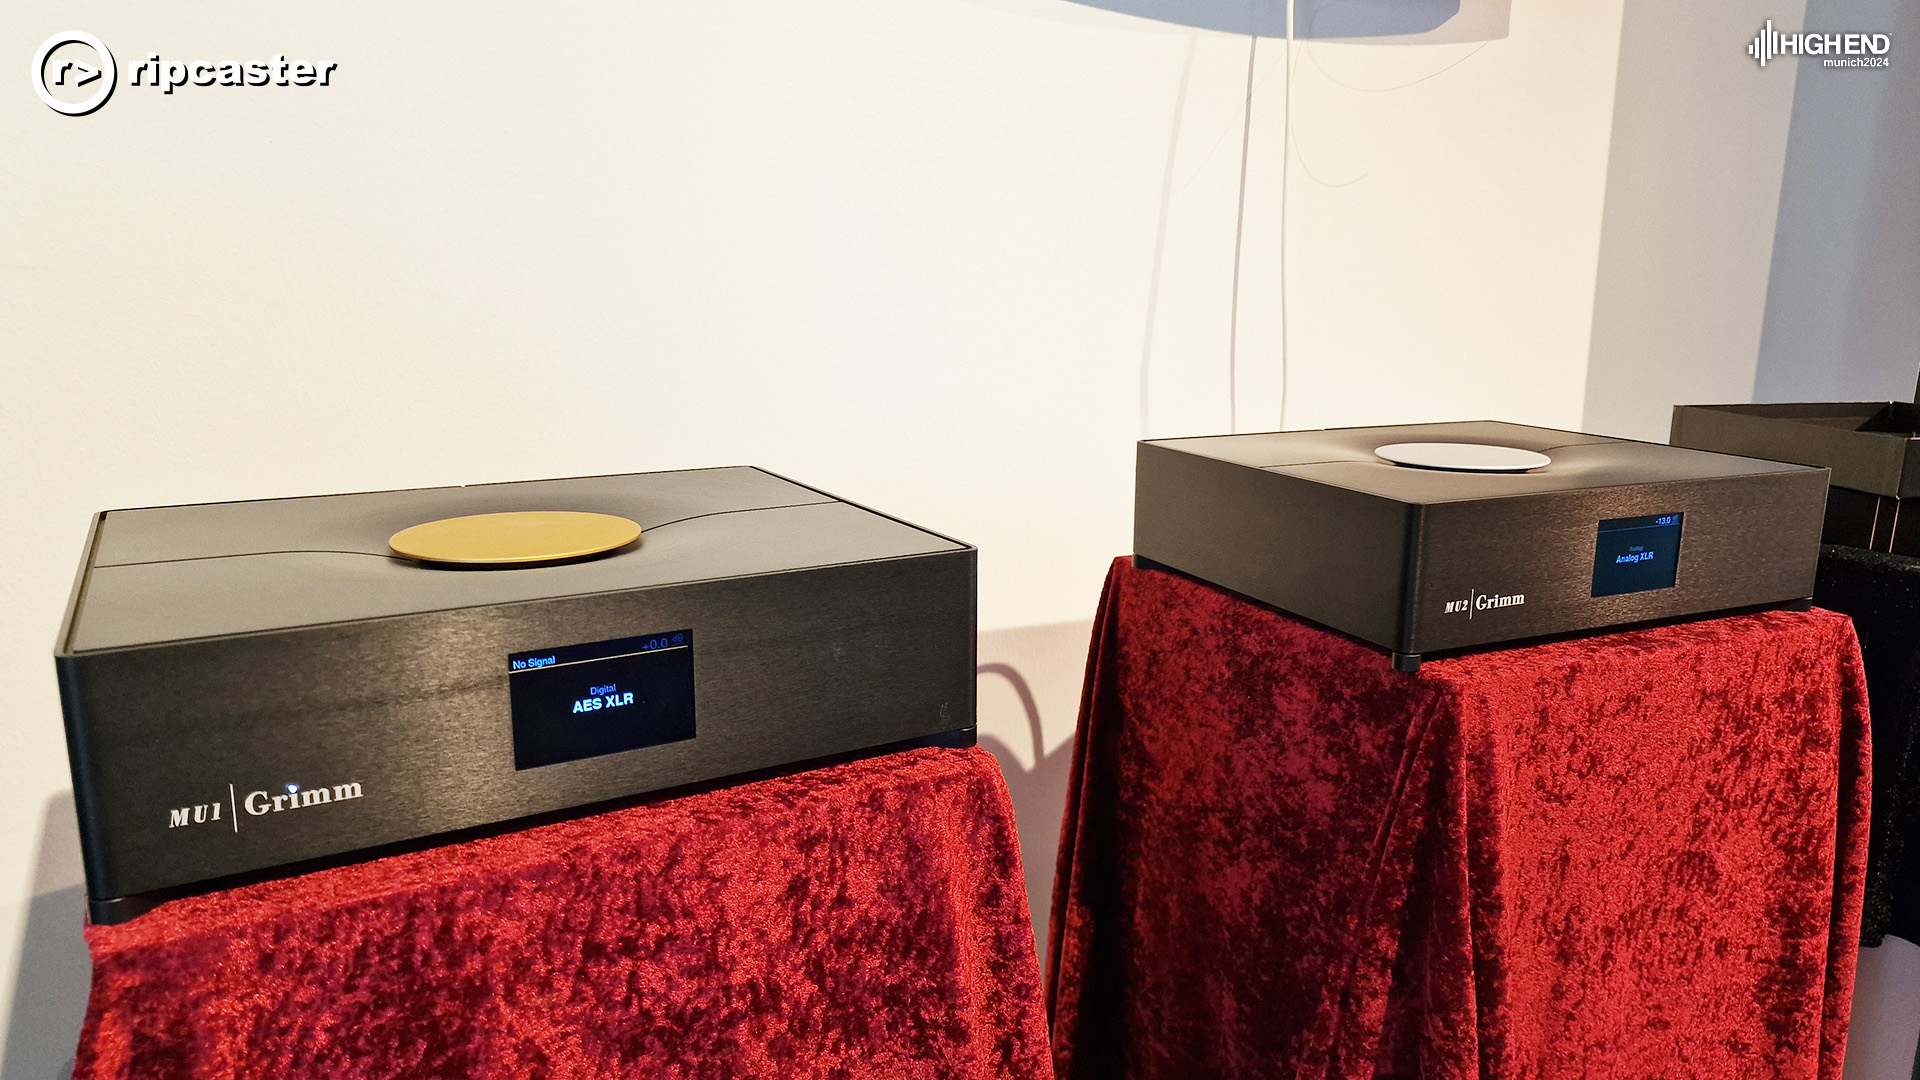 Two Grimm audio units on plinths with red velvet draped over.  The back wall is cream.  The unit to the left is an MU1.